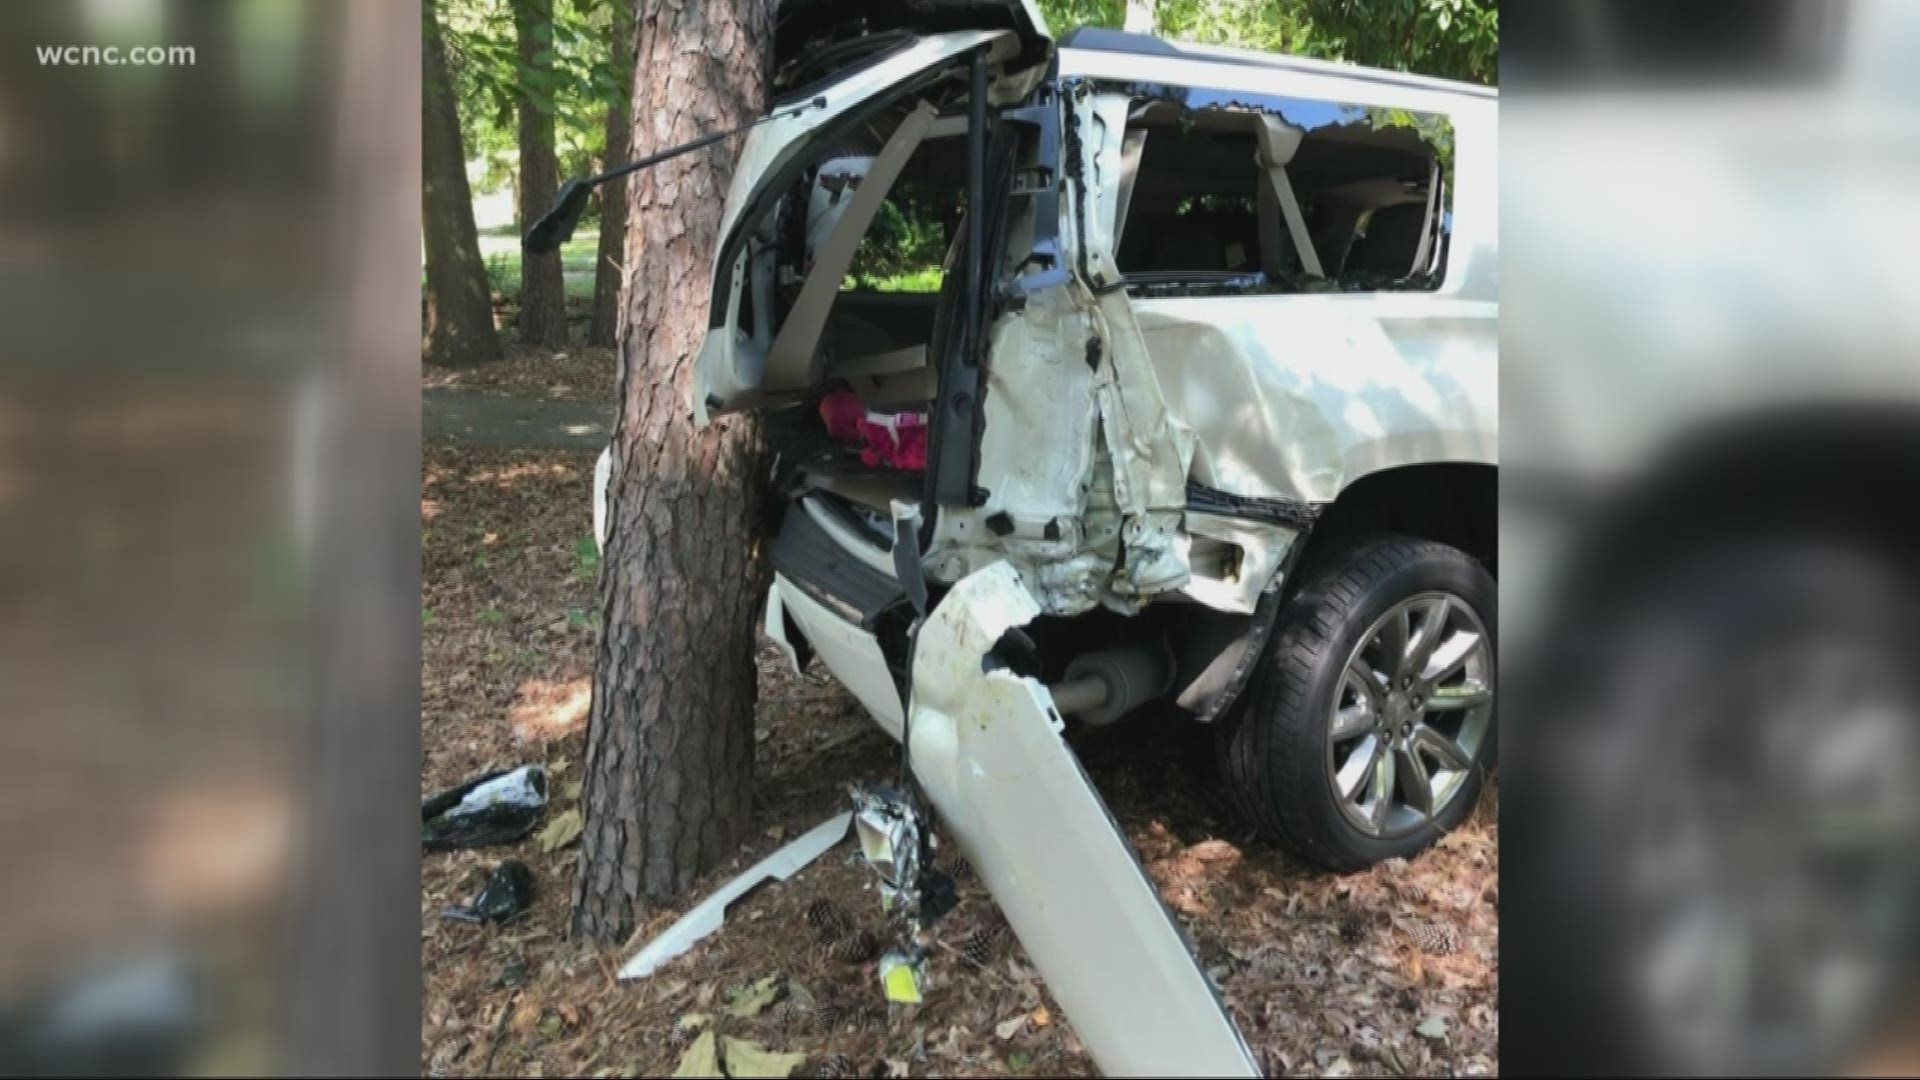 A Gastonia mother said her family's Chevy Suburban rolled backward down a hill with a 2-year-old inside, even though the car was off.